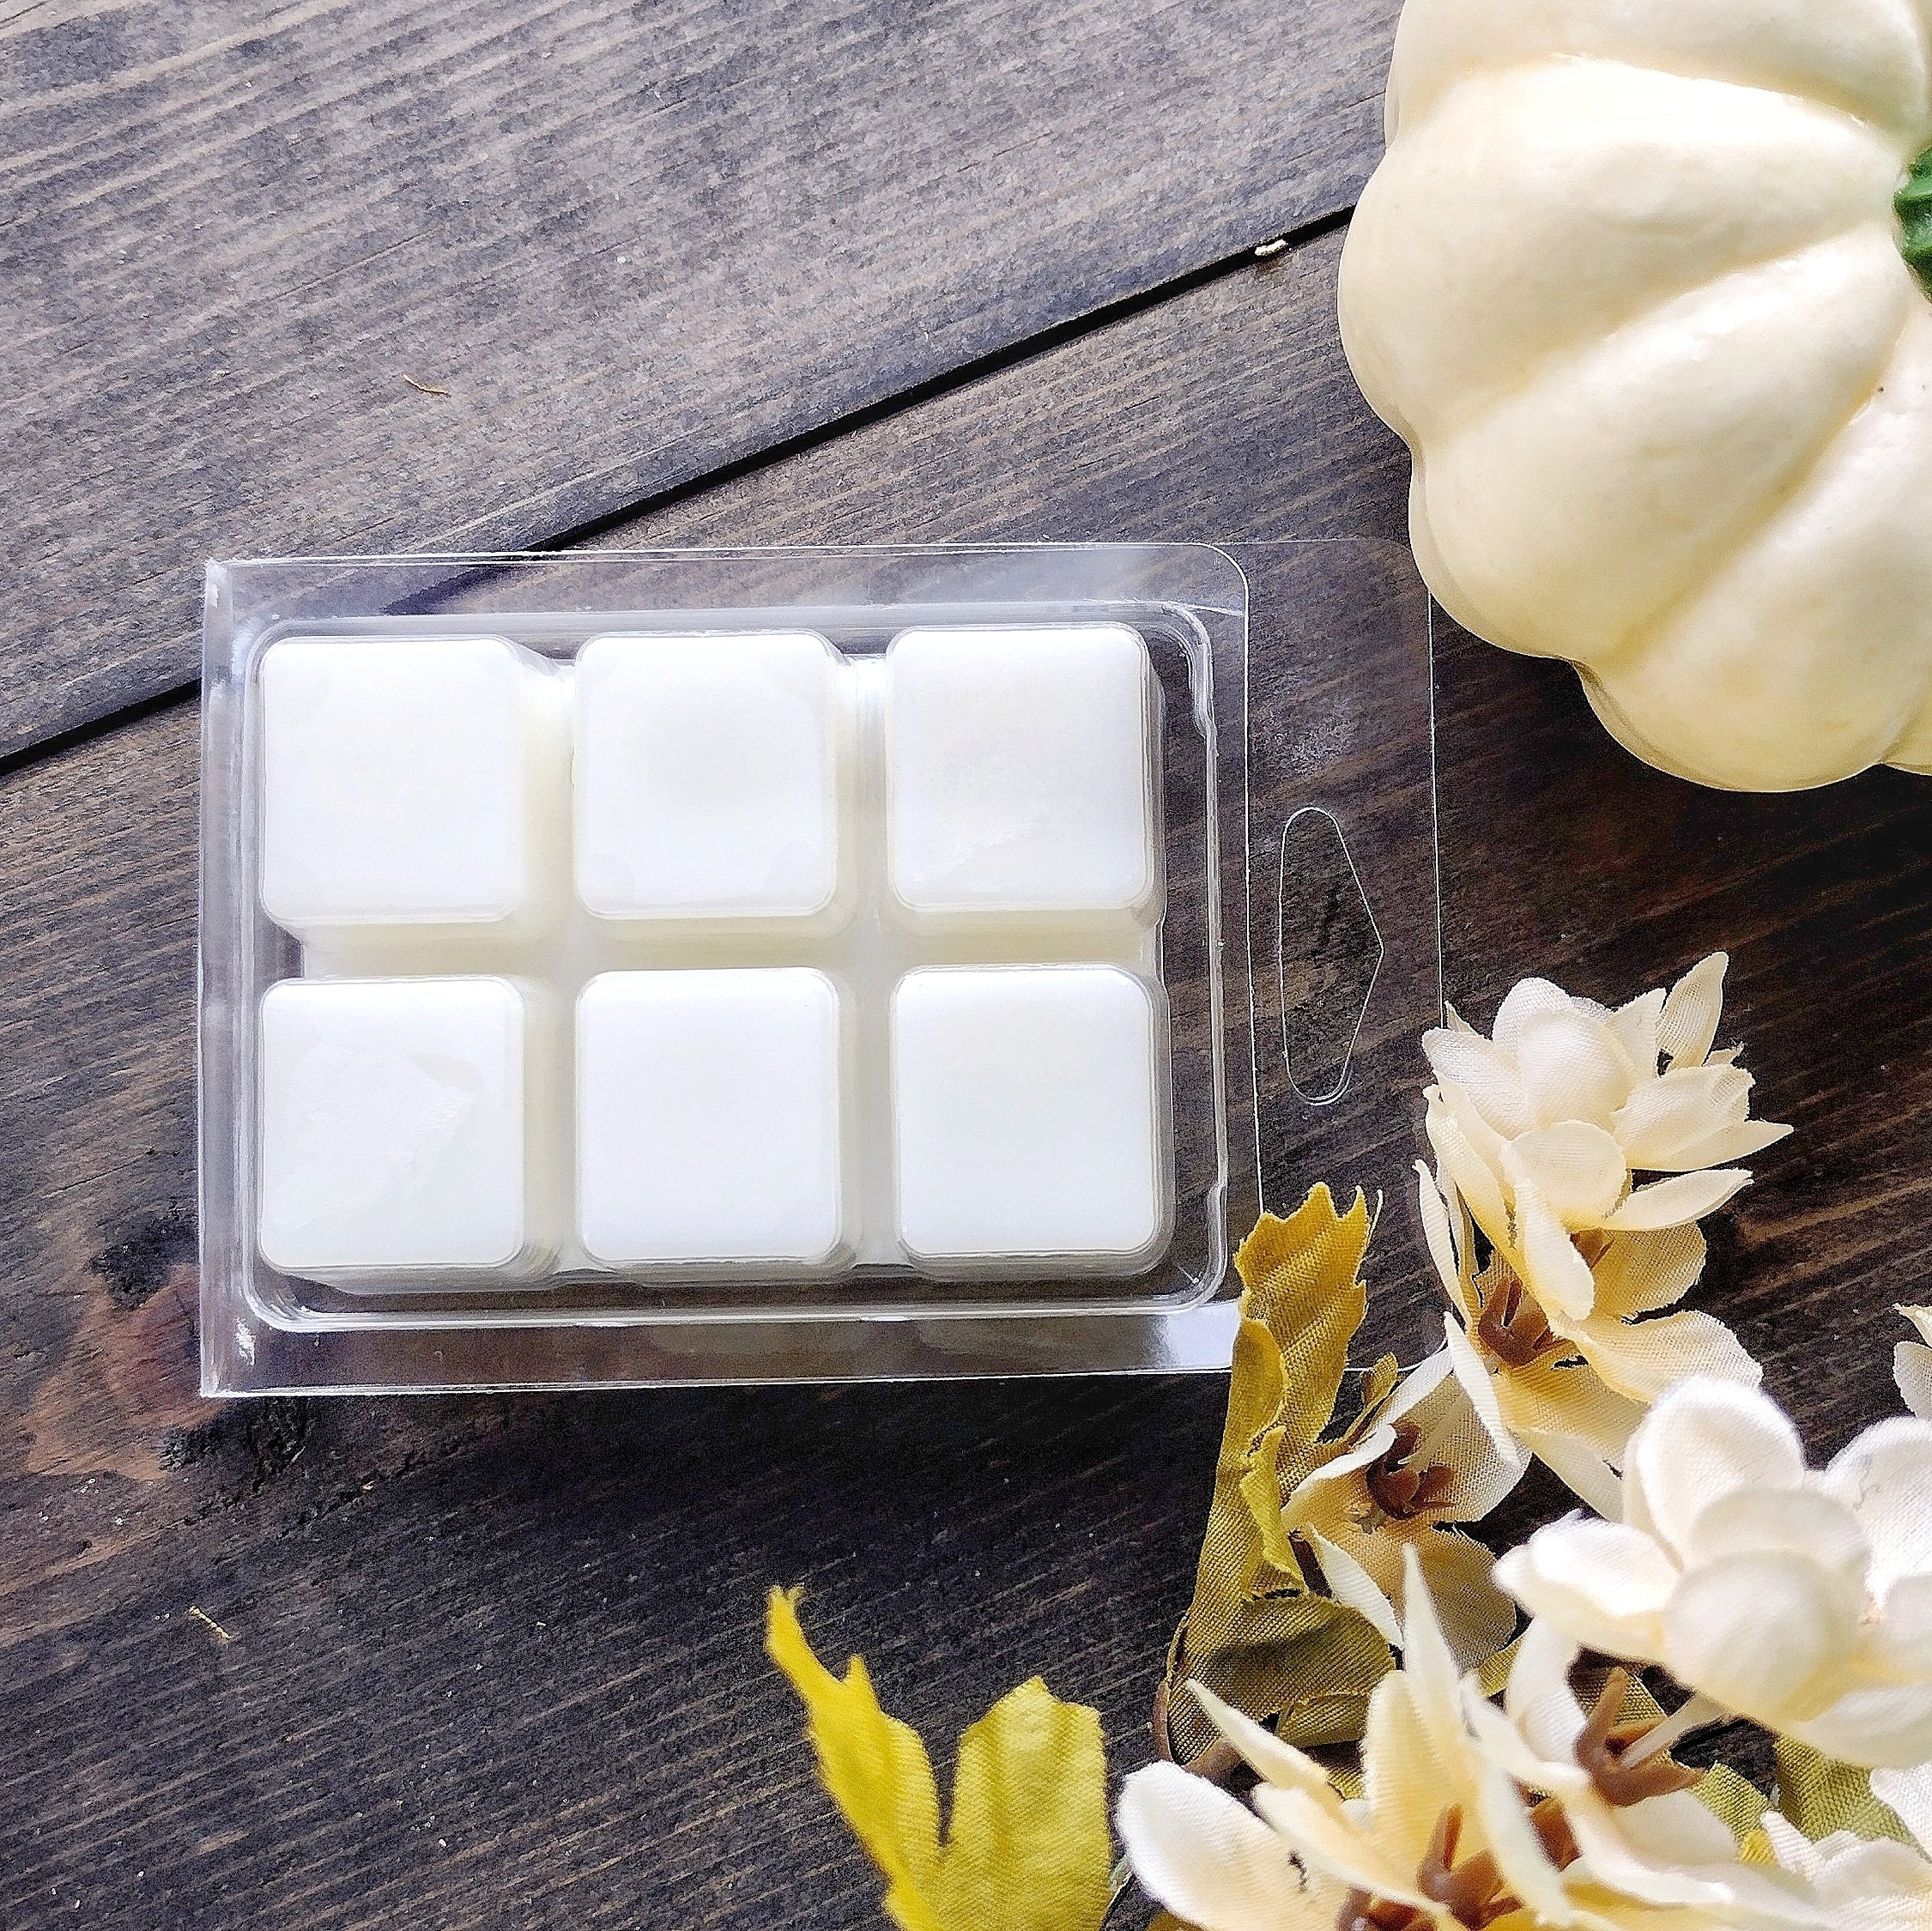 “Smelts” Smoothie Wax Melts